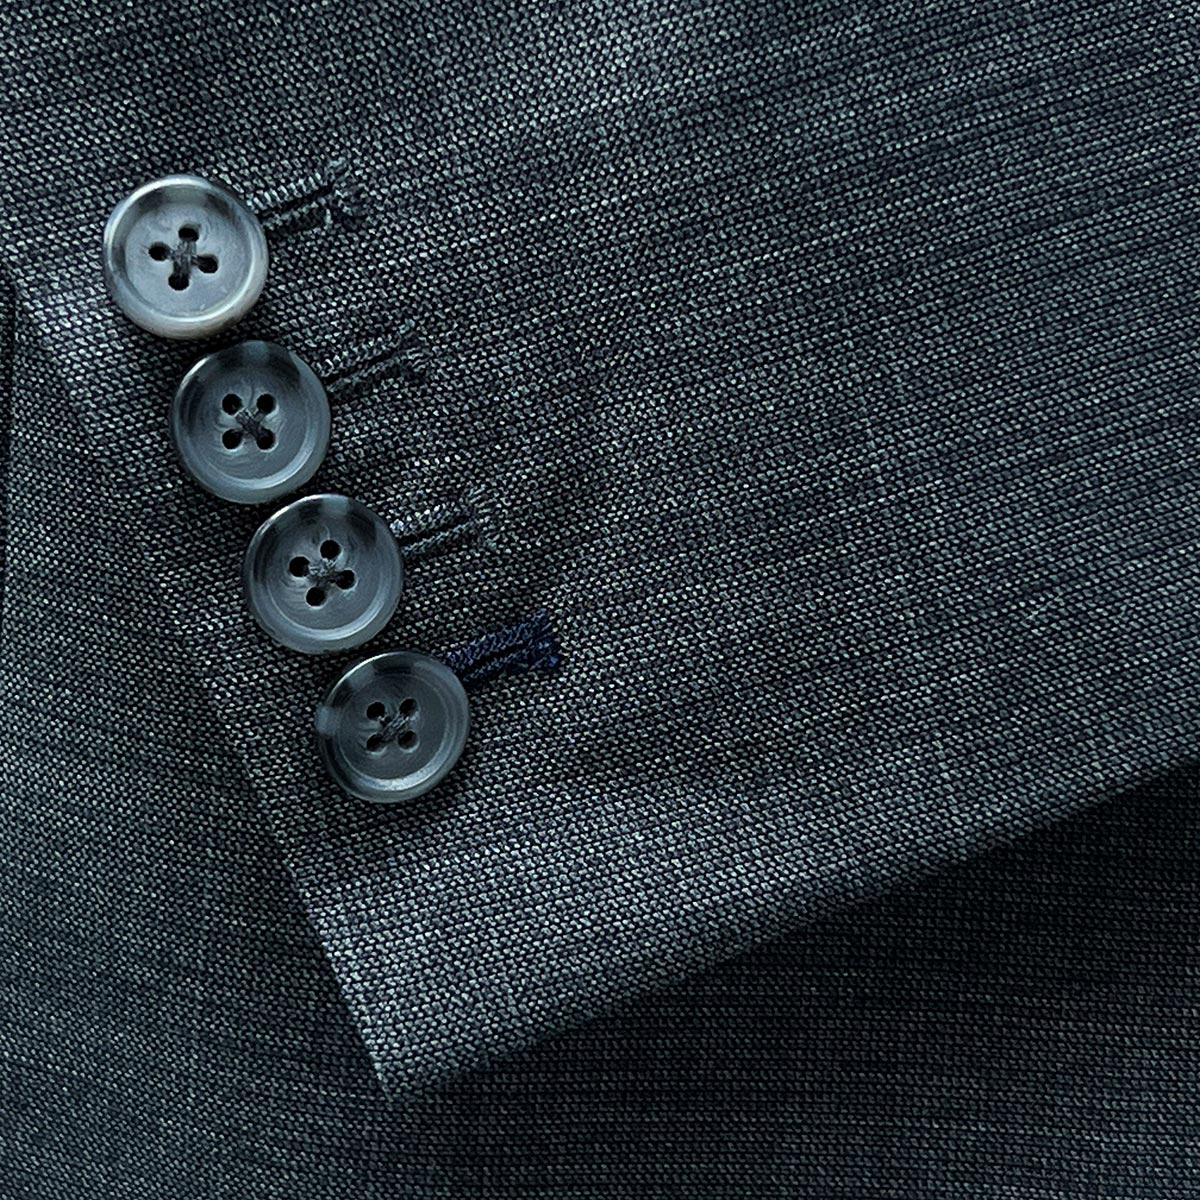 Functional sleeve buttonholes allowing for easy adjustment on a dark grey nailhead suit.